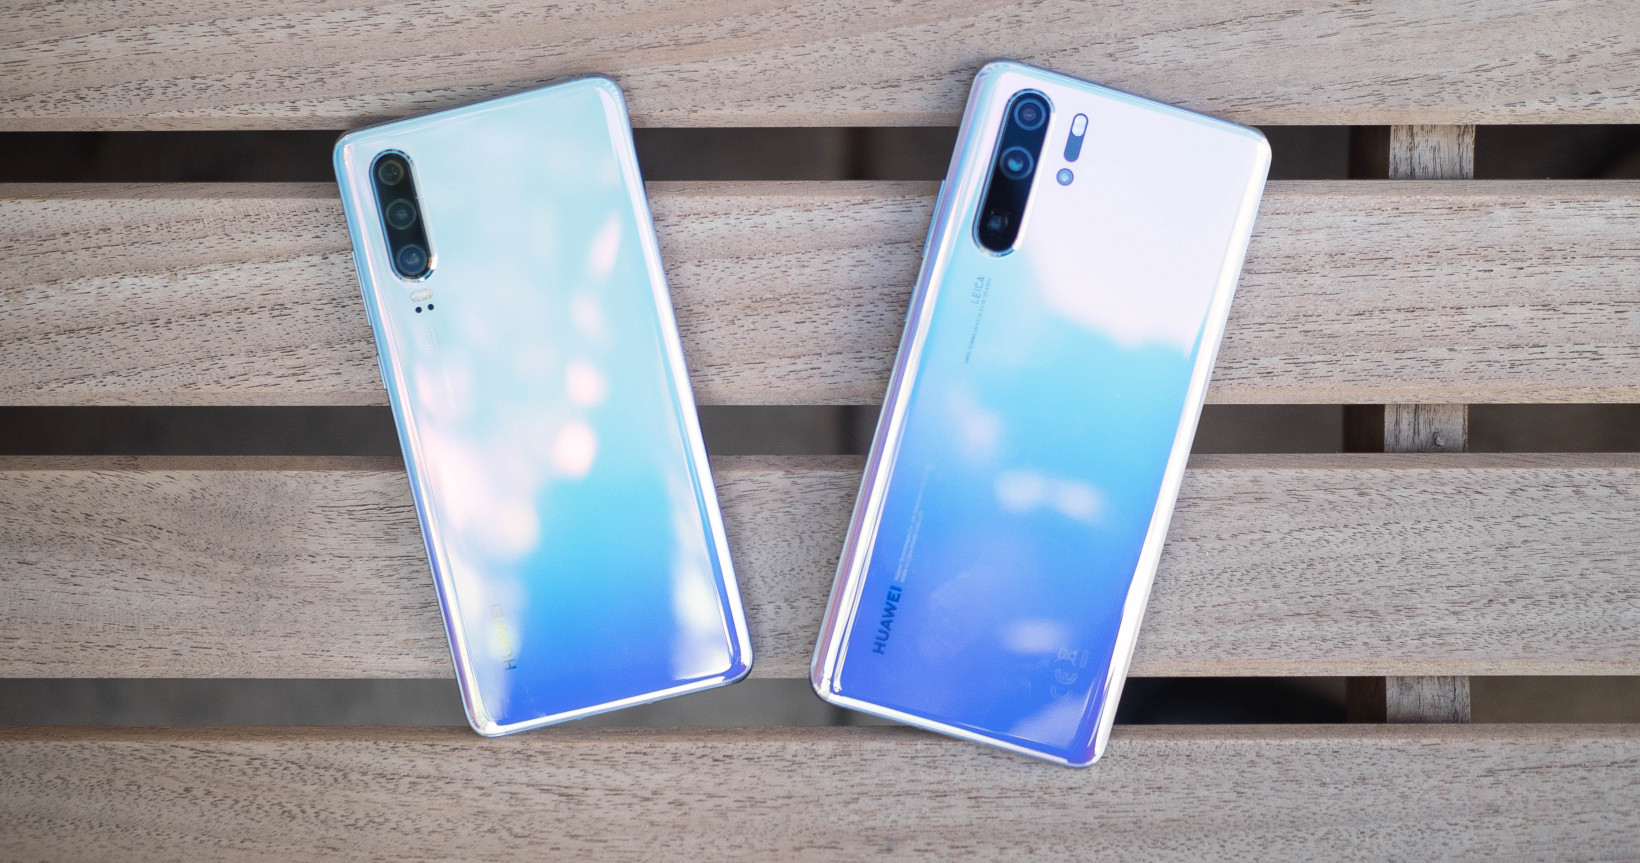 Here's why the HUAWEI P30 Pro’s camera could redefine smartphone photography